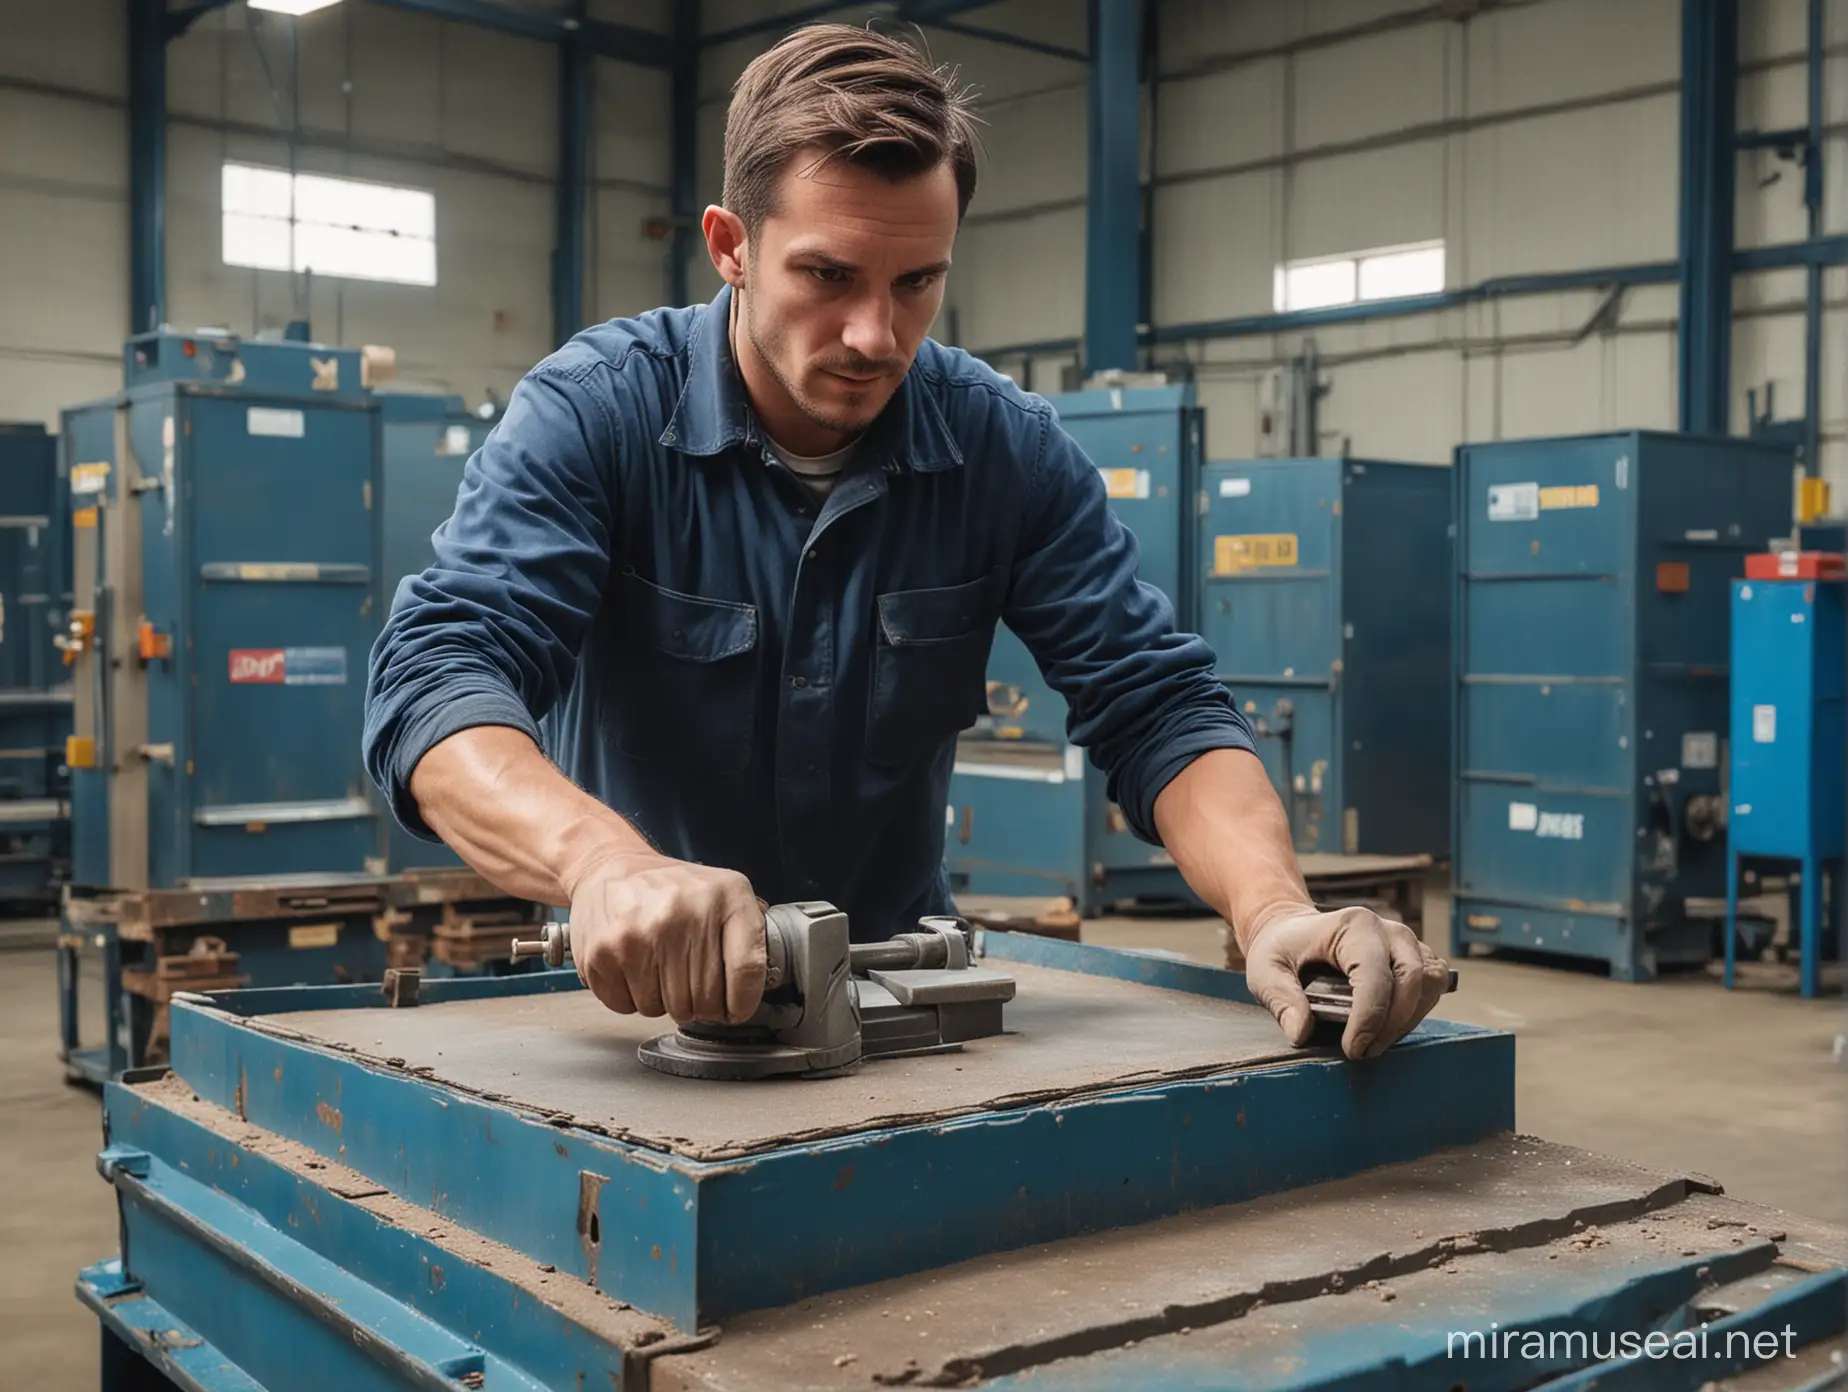 European Man Sanding Large Metal Container in Blue Factory Setting